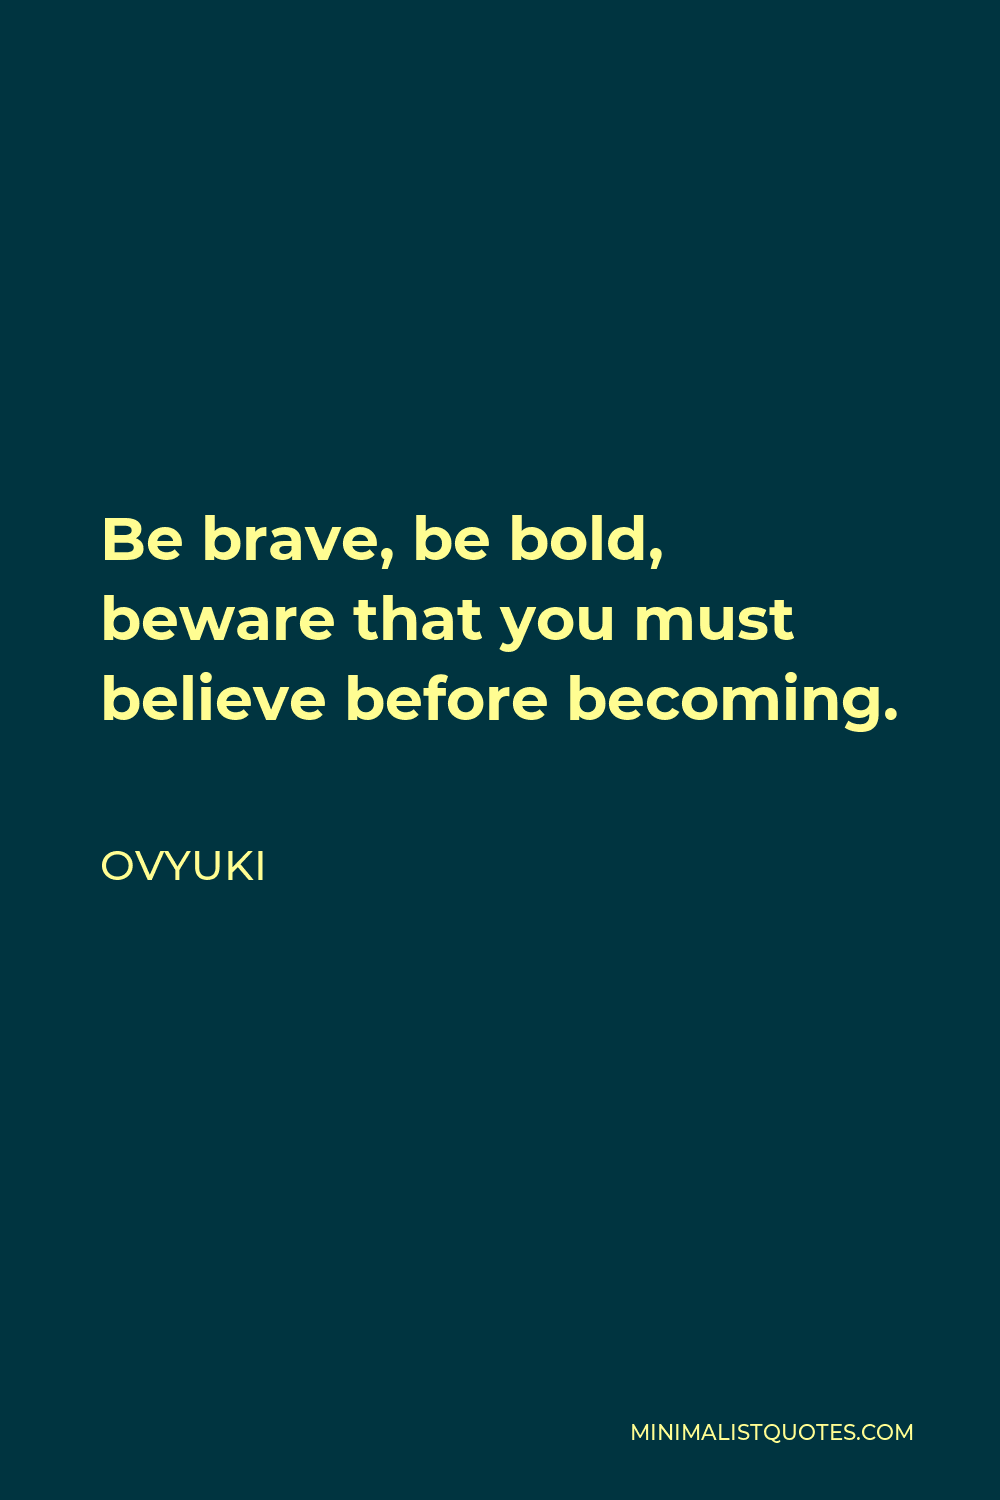 Ovyuki Quote - Be brave, be bold, beware that you must believe before becoming.